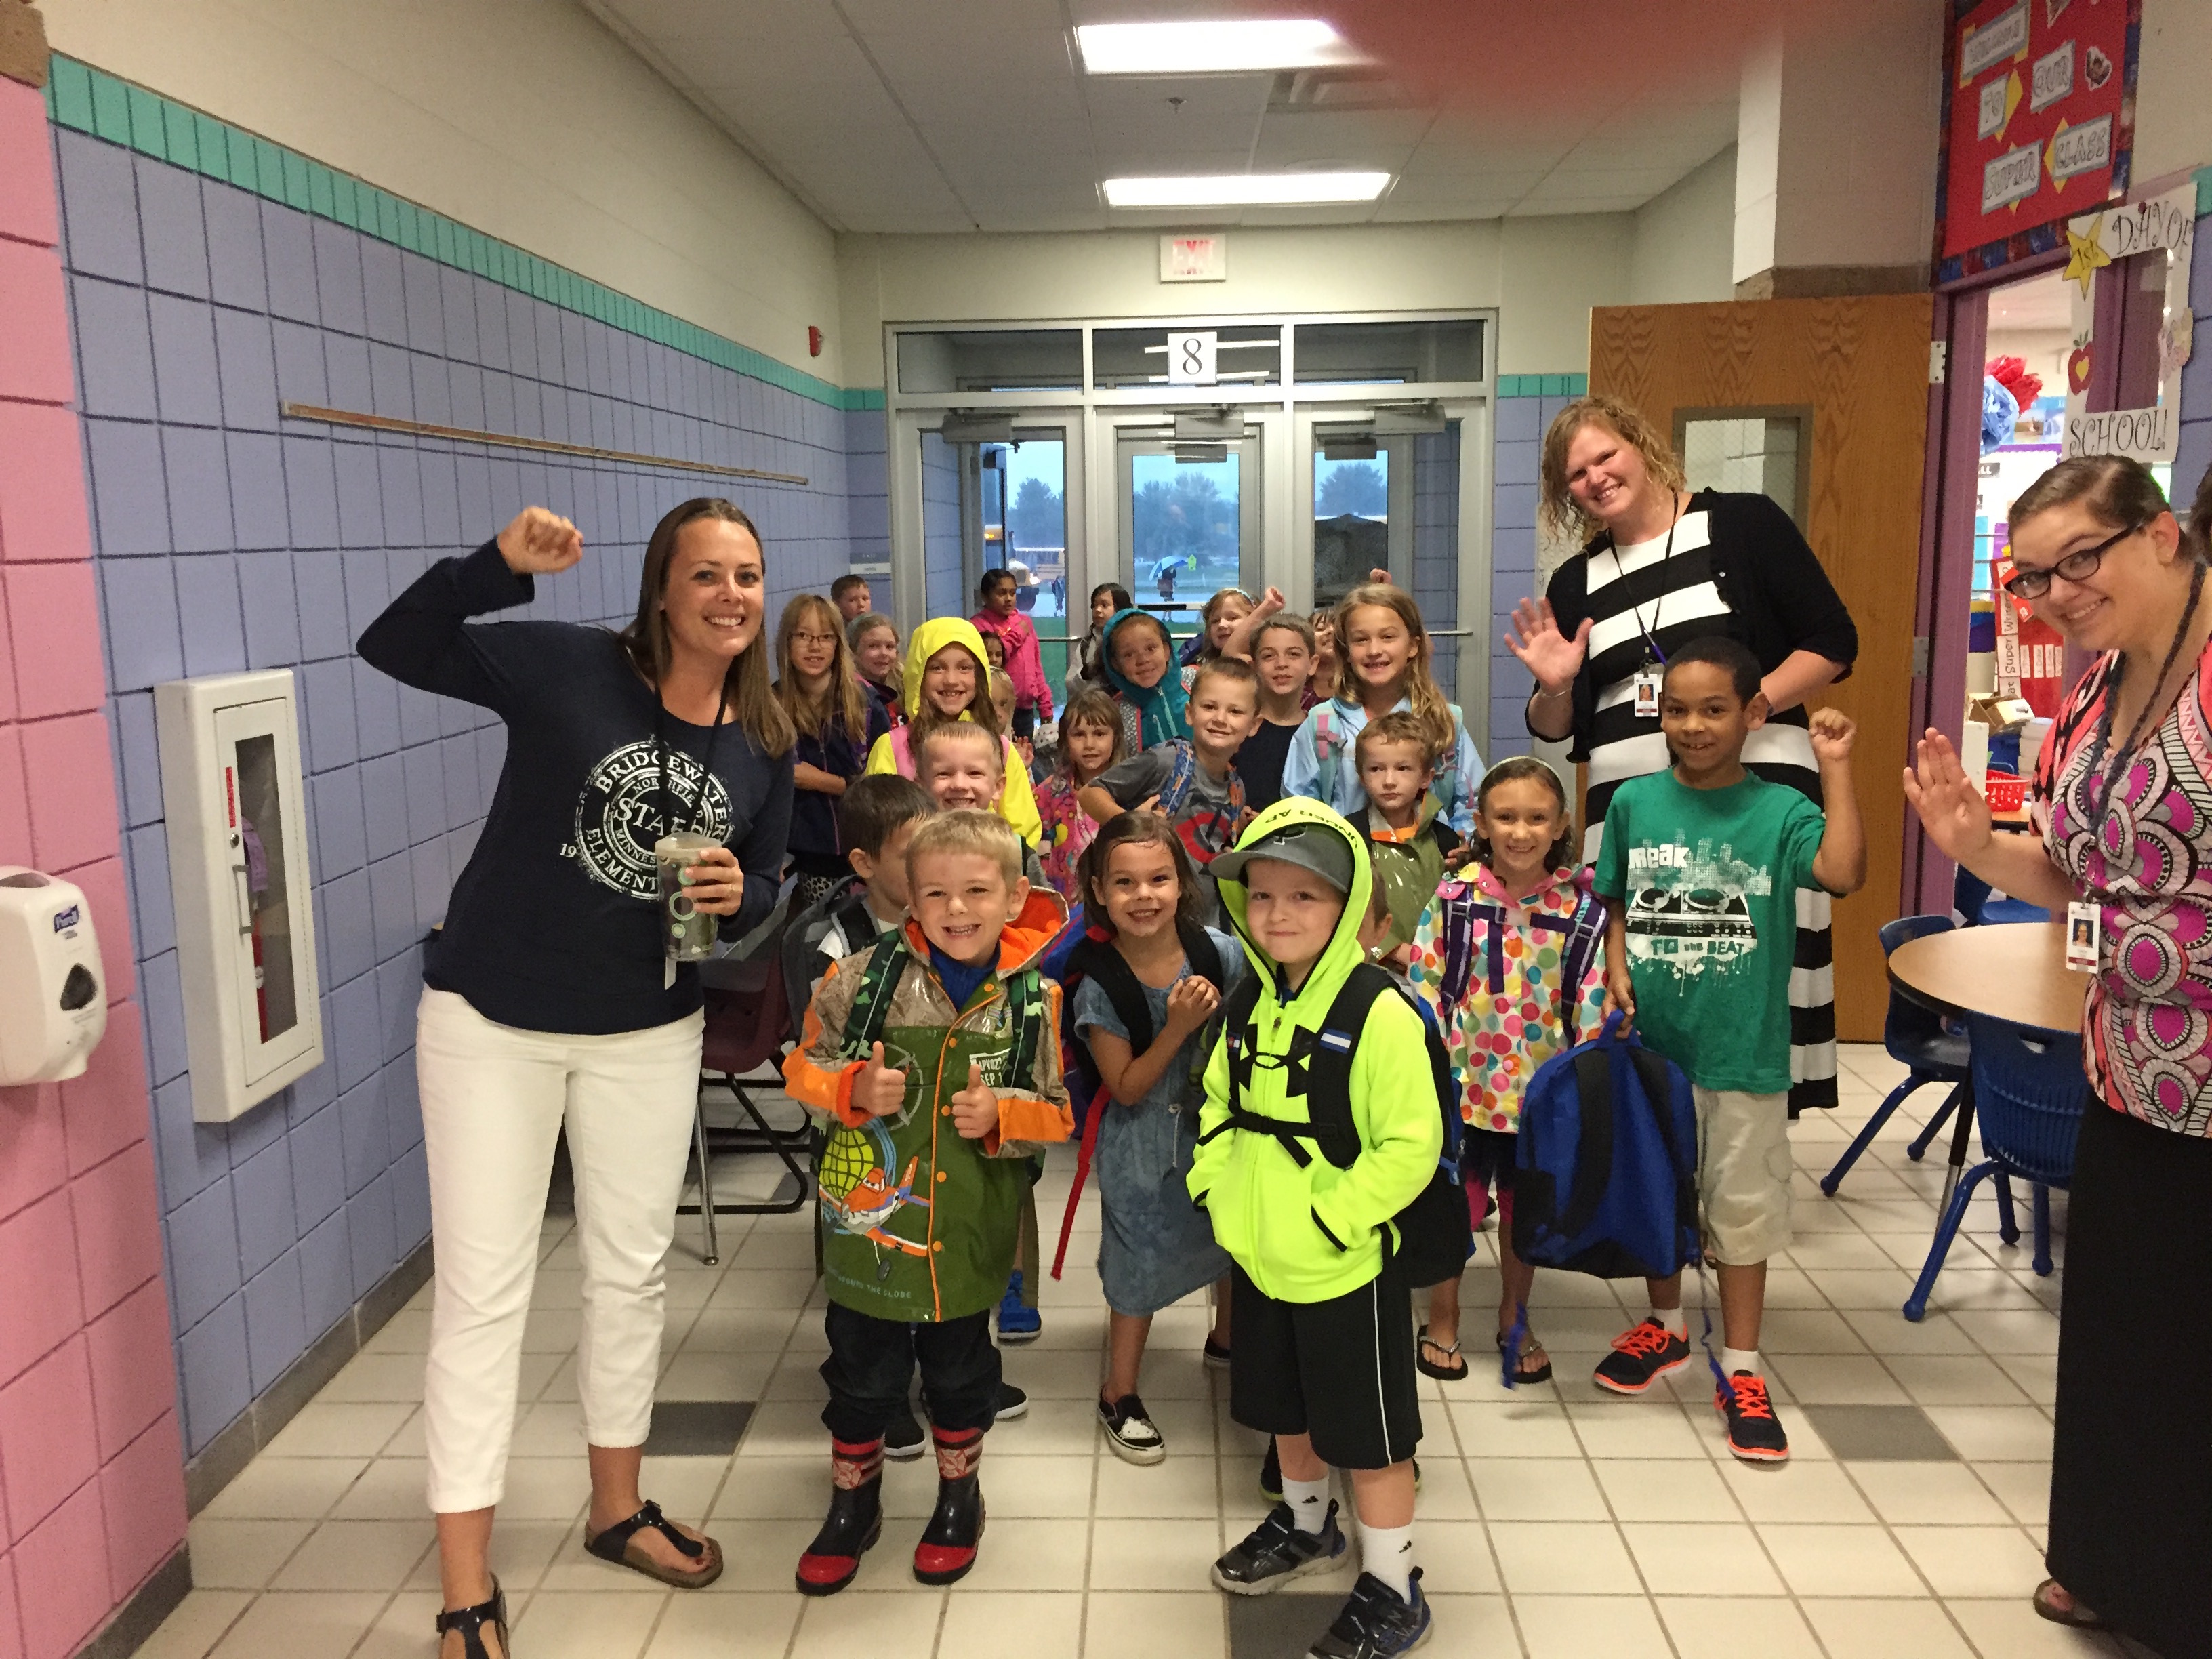 The first day of school was great because… Northfield Public Schools